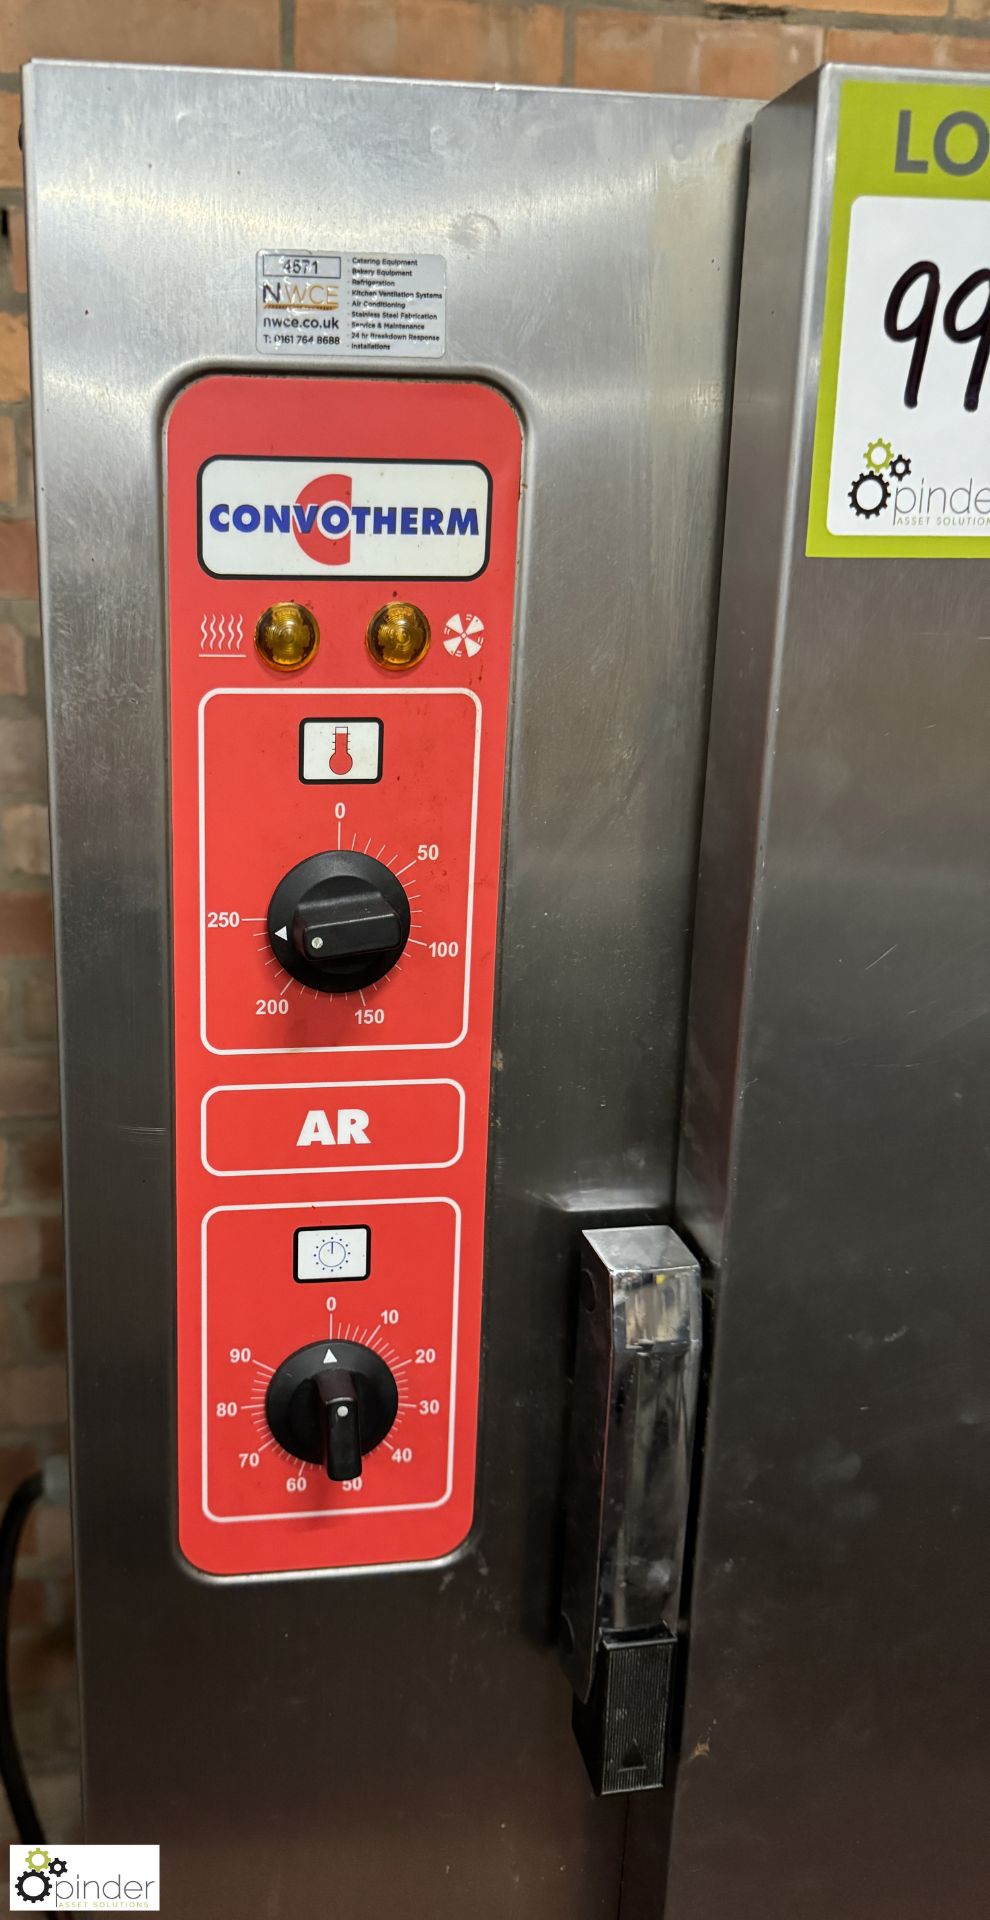 Convotherm AR54 9-deck Fan Oven, 415volts, 1030mm x 720mm x 1500mm, including stand - Image 3 of 6